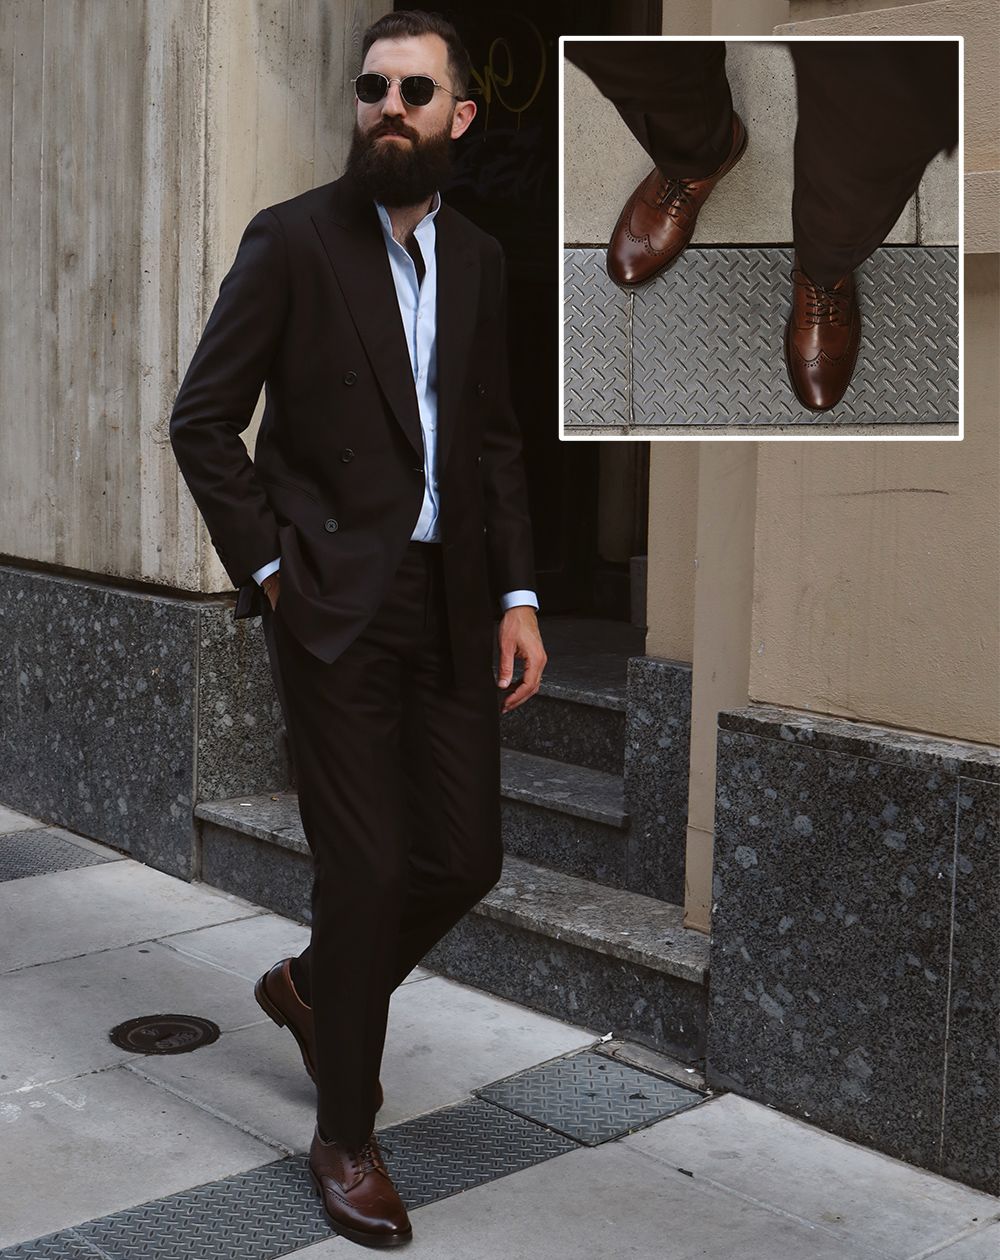 Brogues with a suit